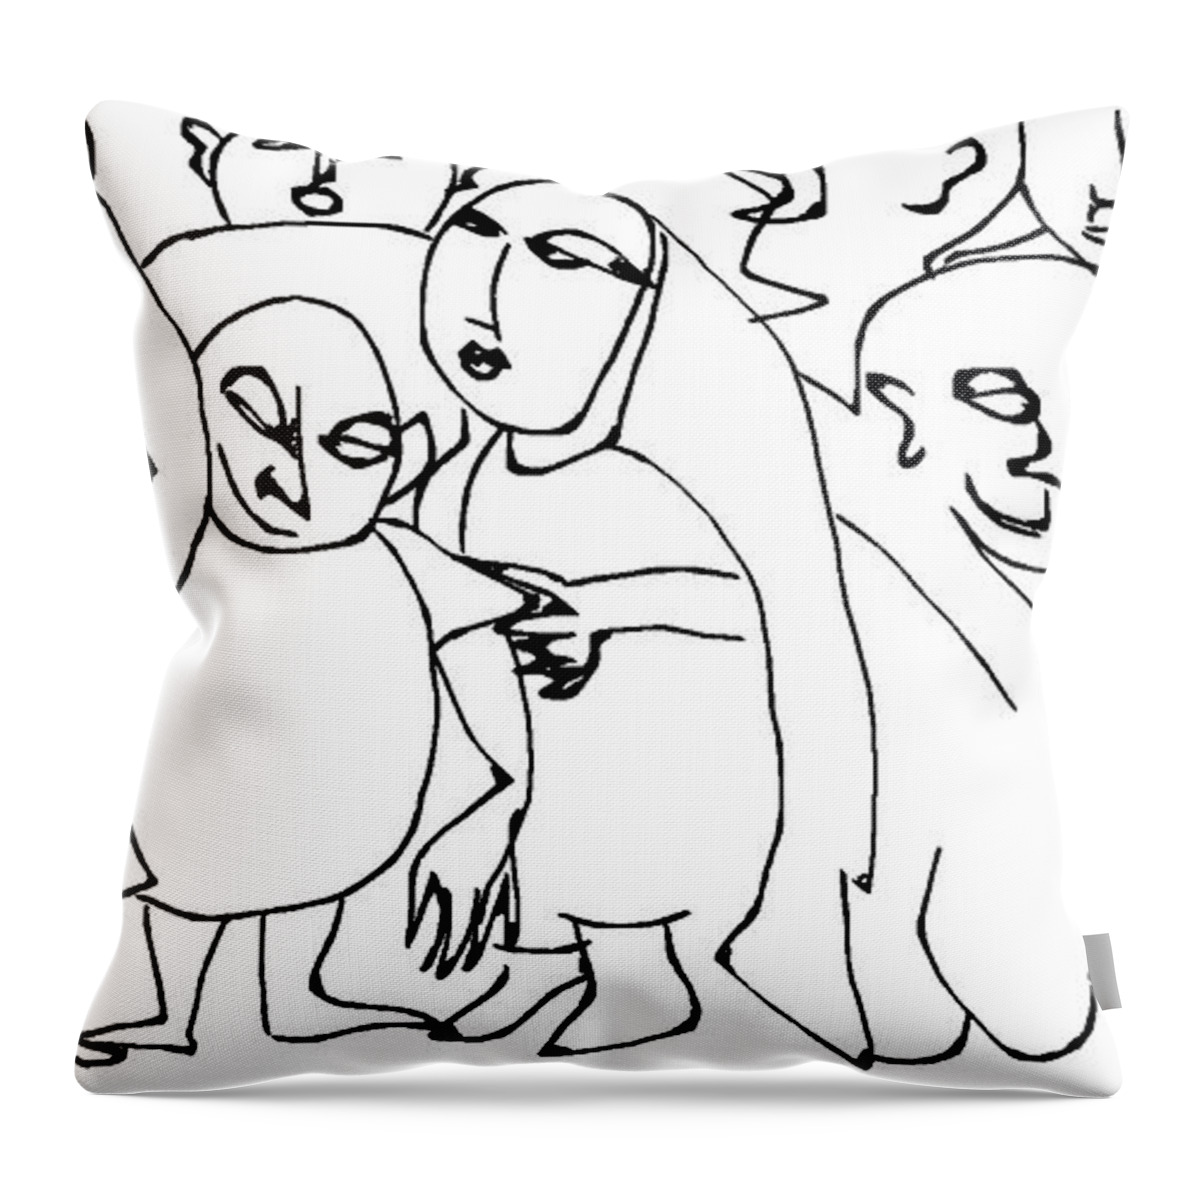  Throw Pillow featuring the digital art Eloise Decided To Get The Children Away From Dad's Poker Game by Doug Duffey